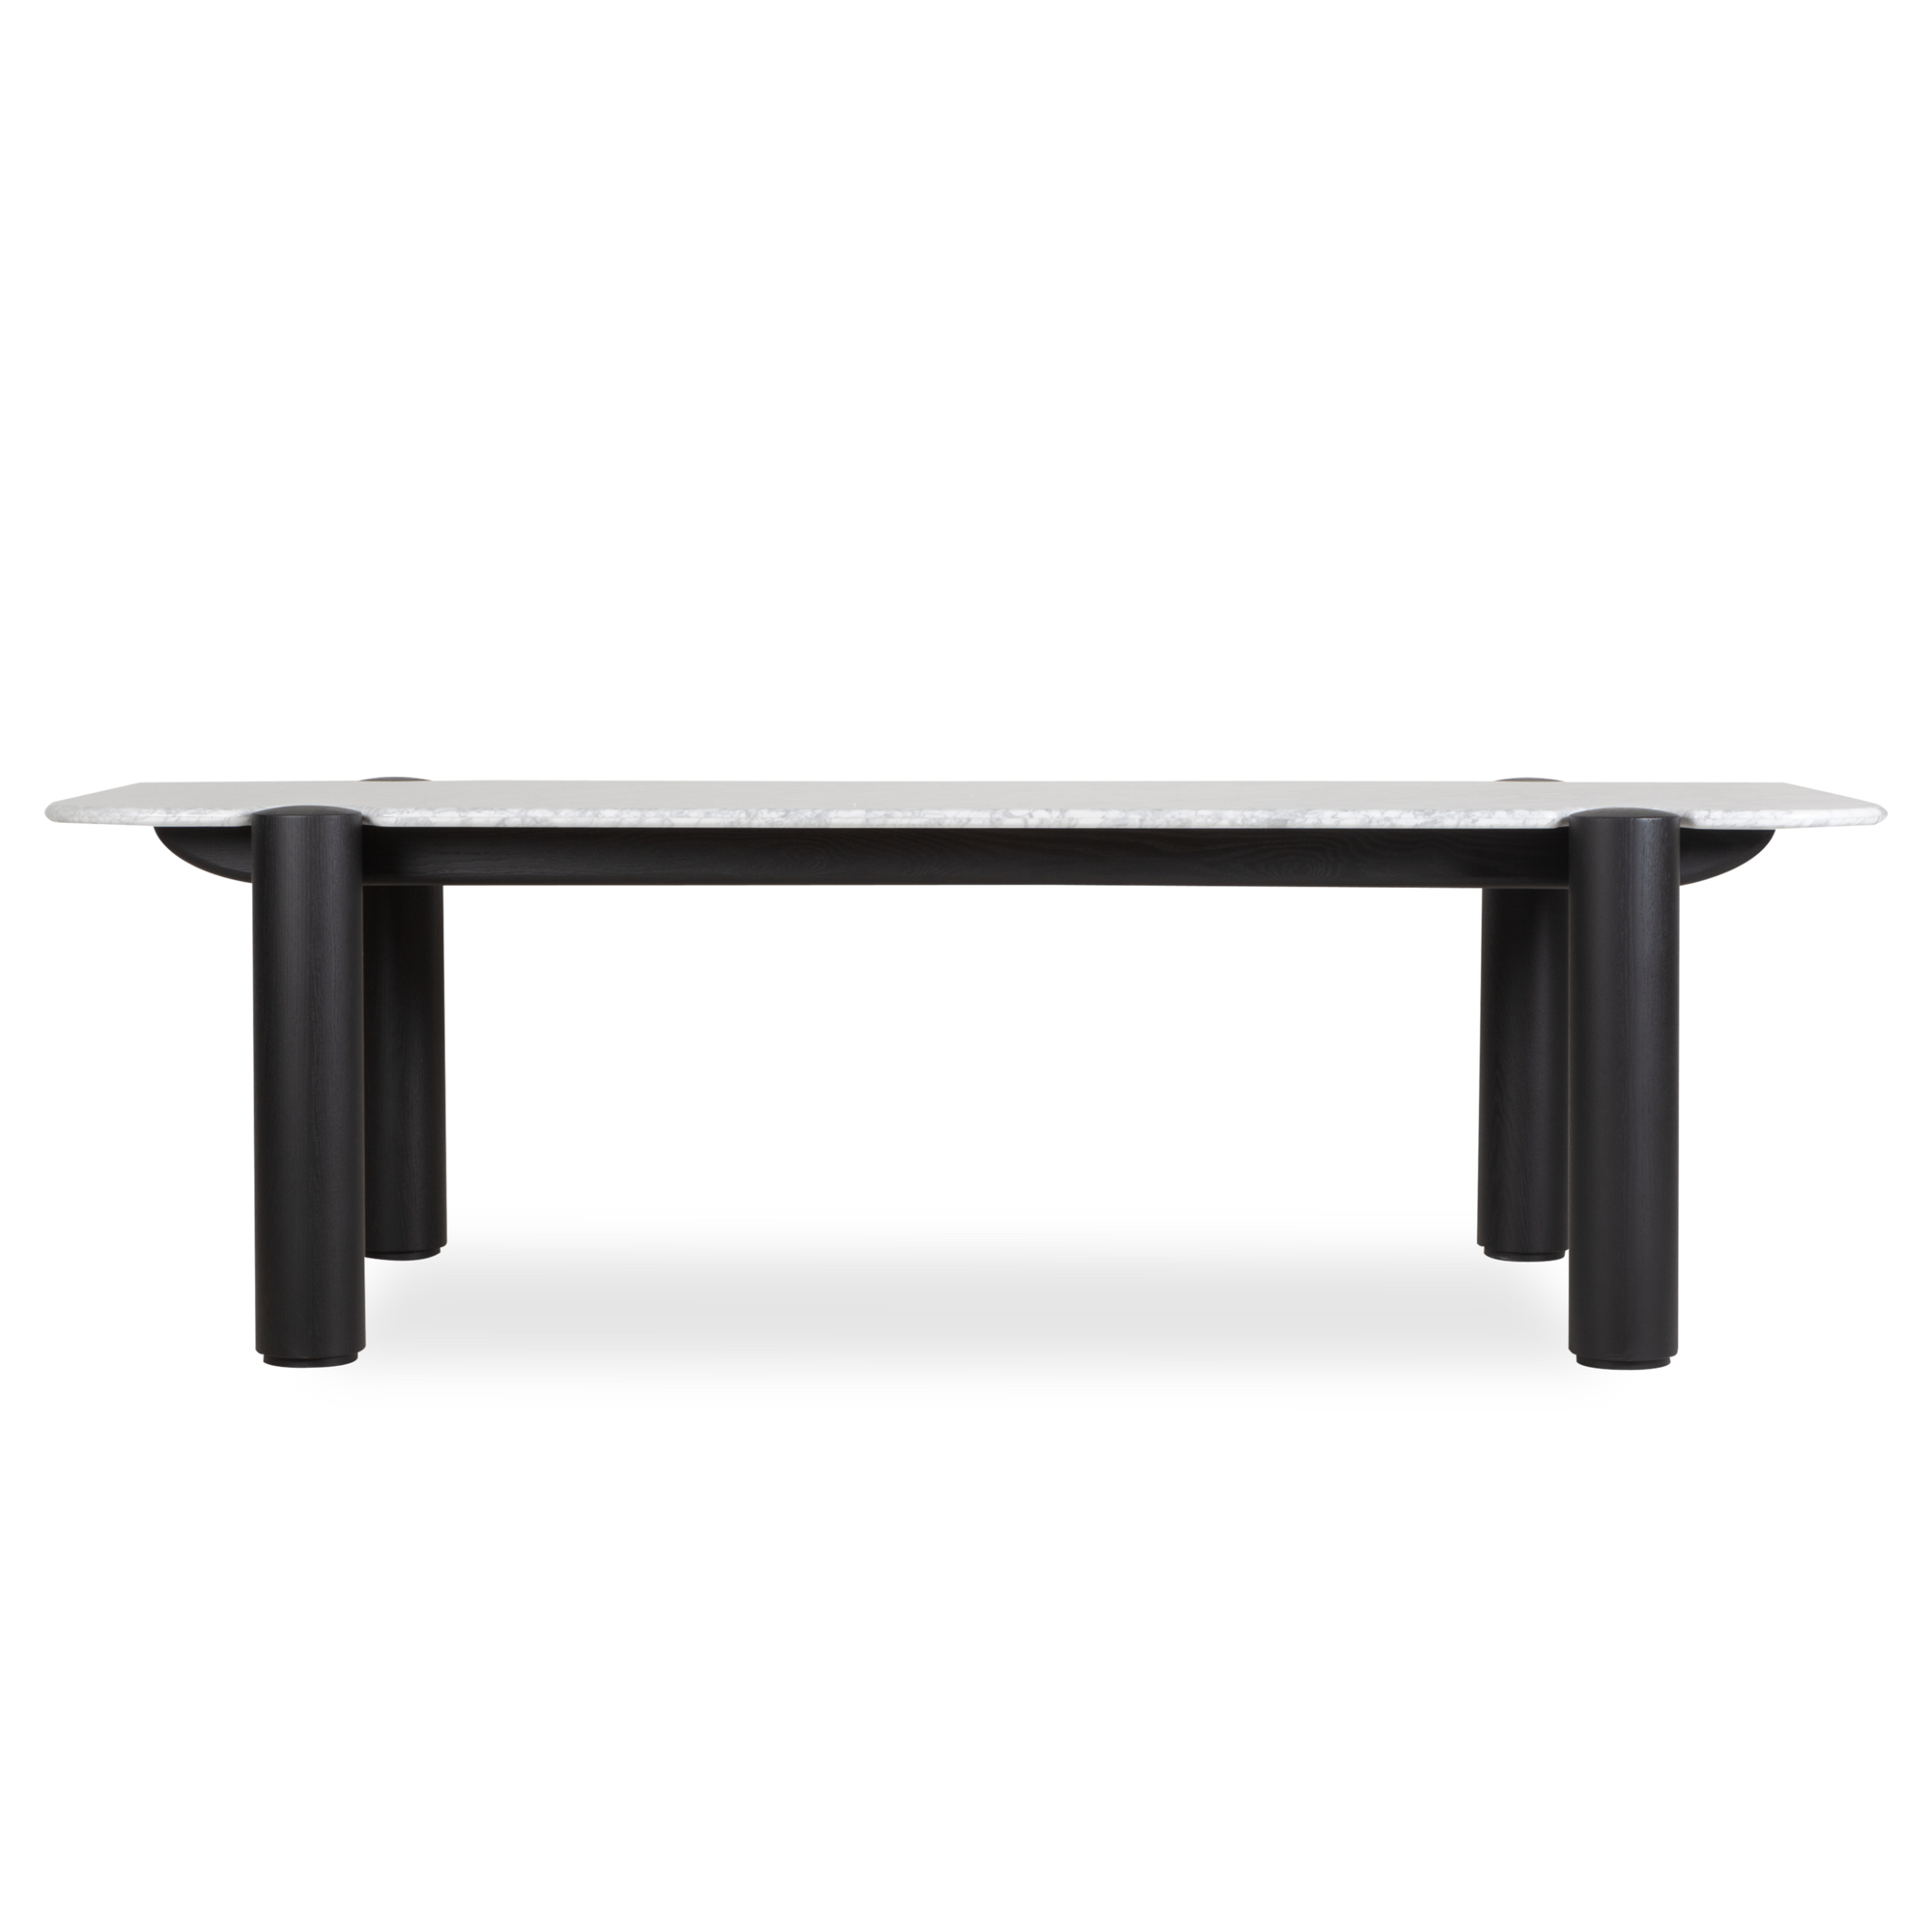 Juxtaposing cool, curved marble with rich, warm timber, the Tactile Dining Table offers a sensual dining experience.